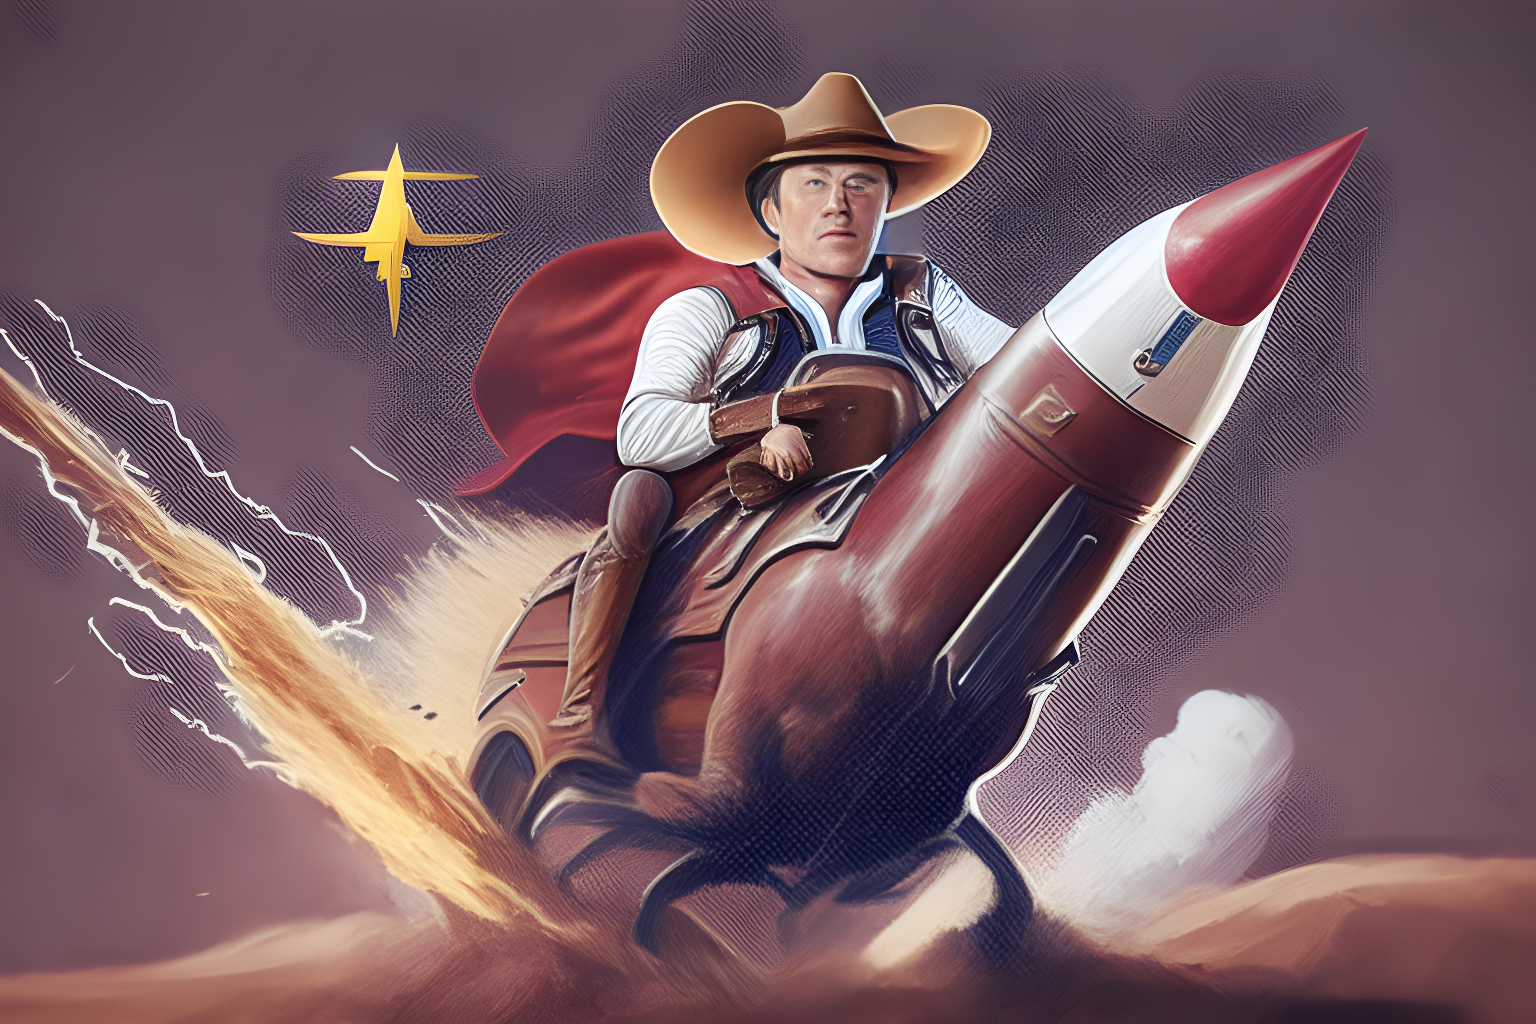 Elon Musk Wearing a Cowboy Hat, Riding a Rocket Like a Rodeo, Large Twitter Logo in the background